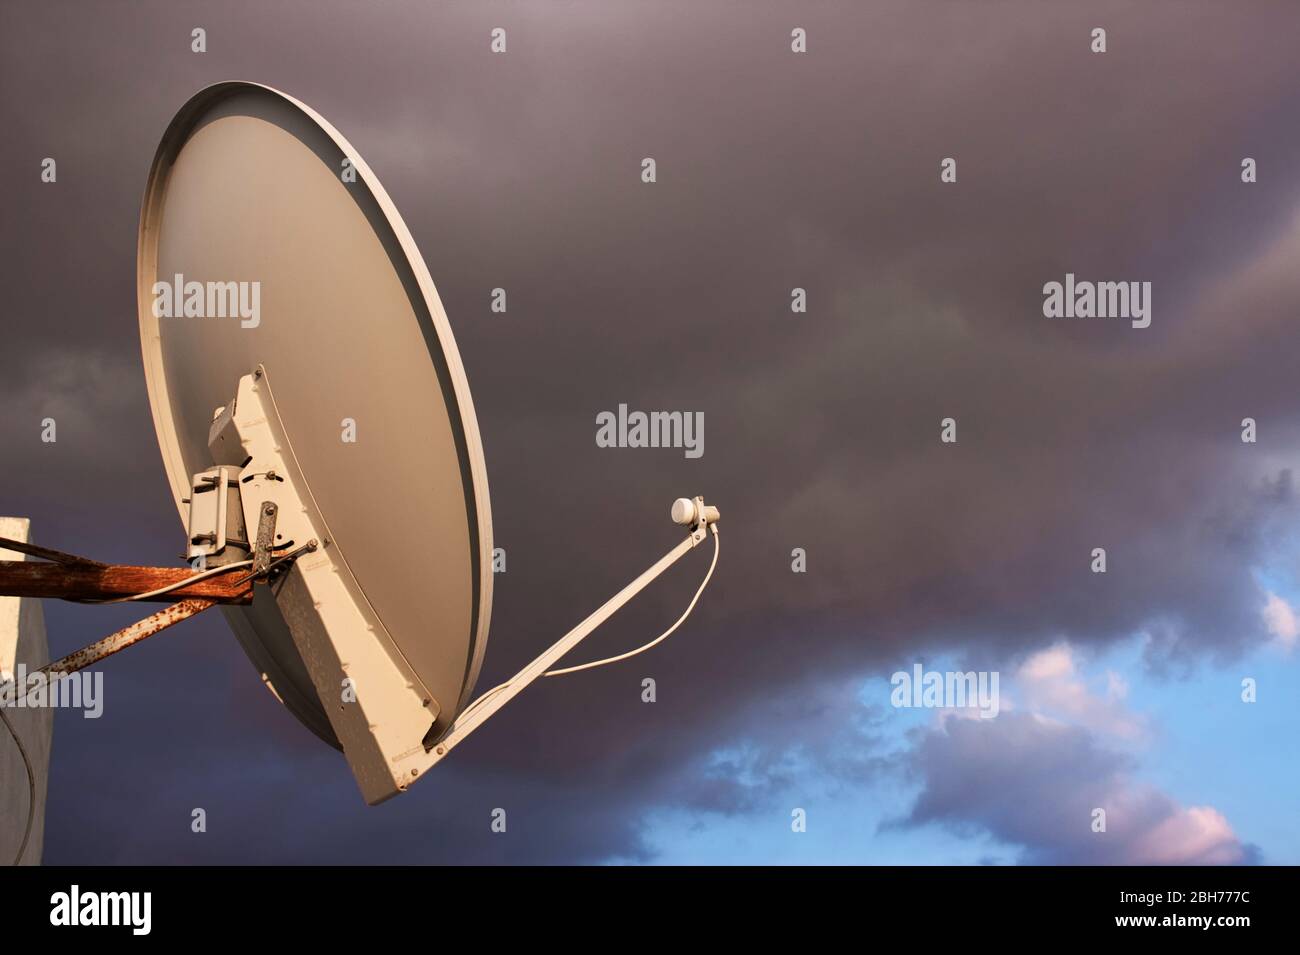 Satellite dish on a rooftop against a cloudy moody sky background Stock Photo